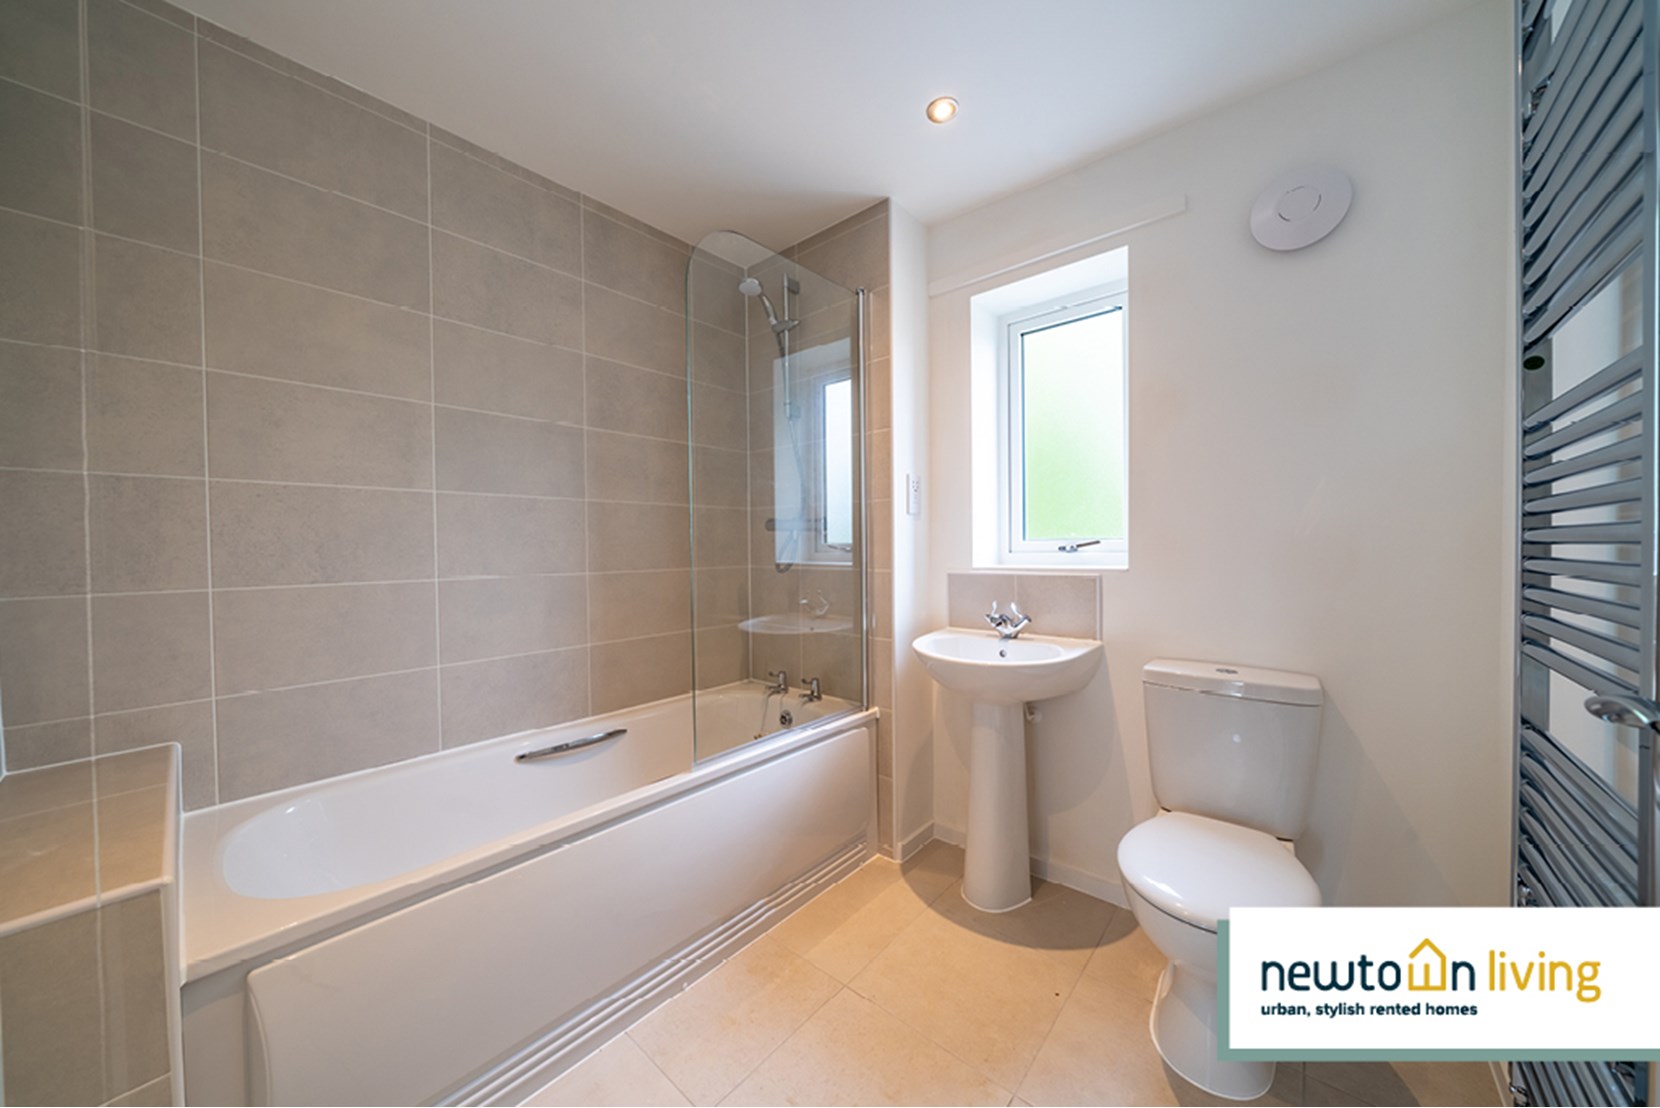 Houses to Rent by Newton Living at Lock 44, Leicester, LE4, bathroom